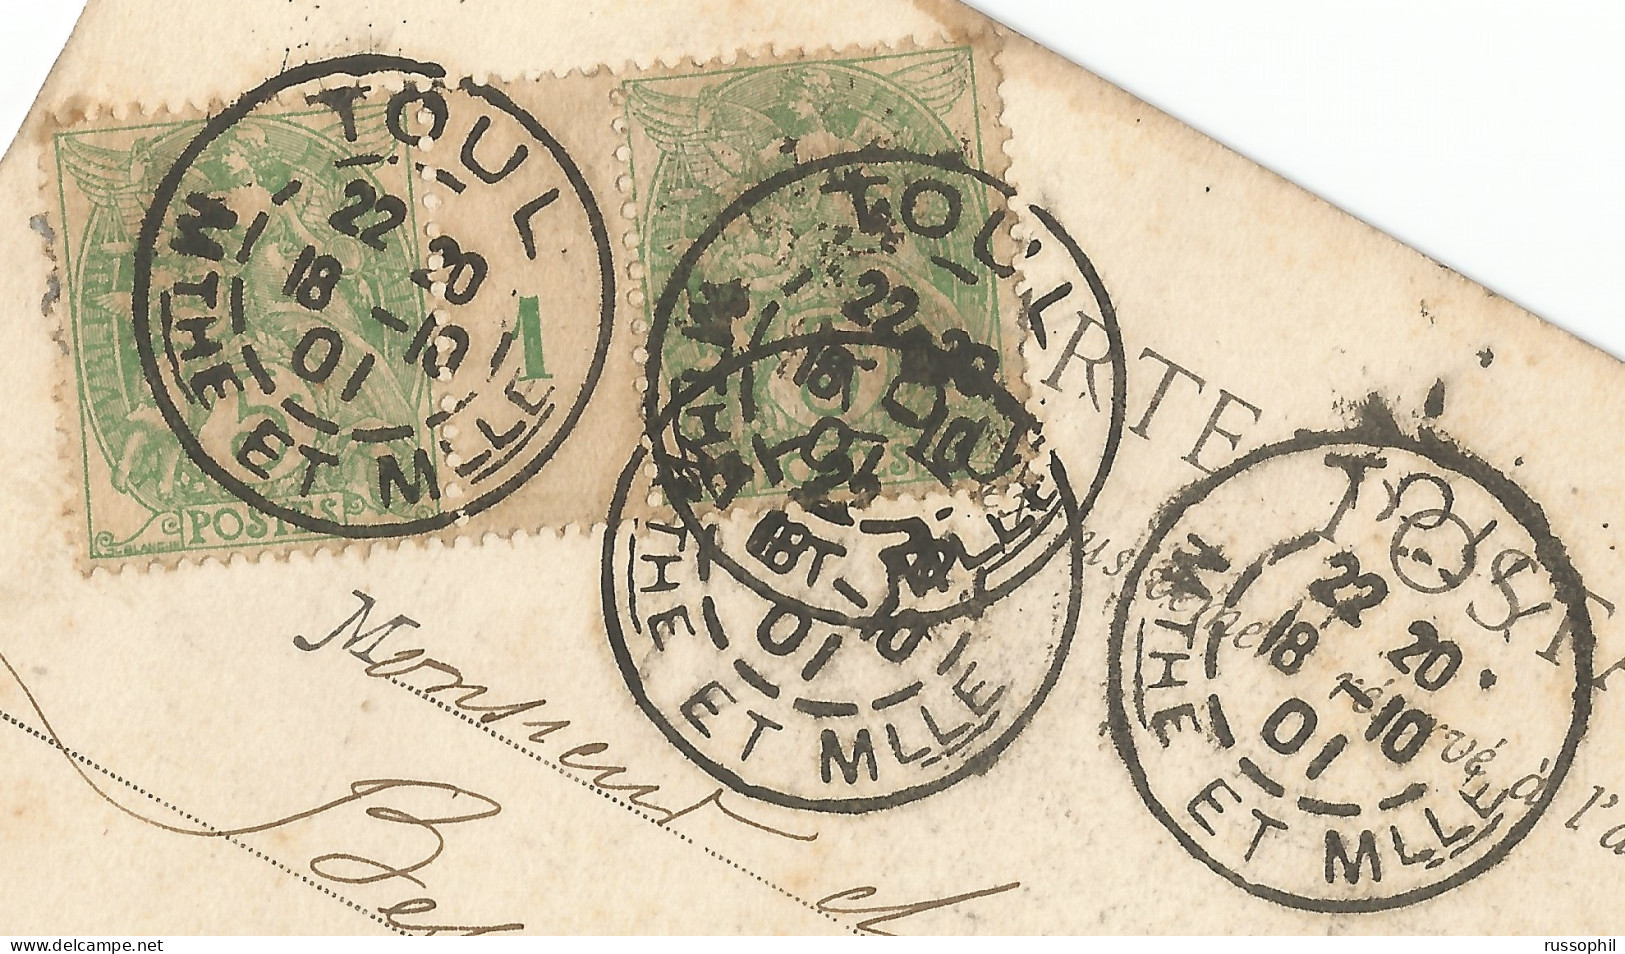 FRANCE - MILLESIMES - PAIRED DAGUIN A3 CDSs "TOUL" ON FRANKED PC (PAIR Yv. 111 MILLESIME 01) TO PARIS - 1901 - Millésimes